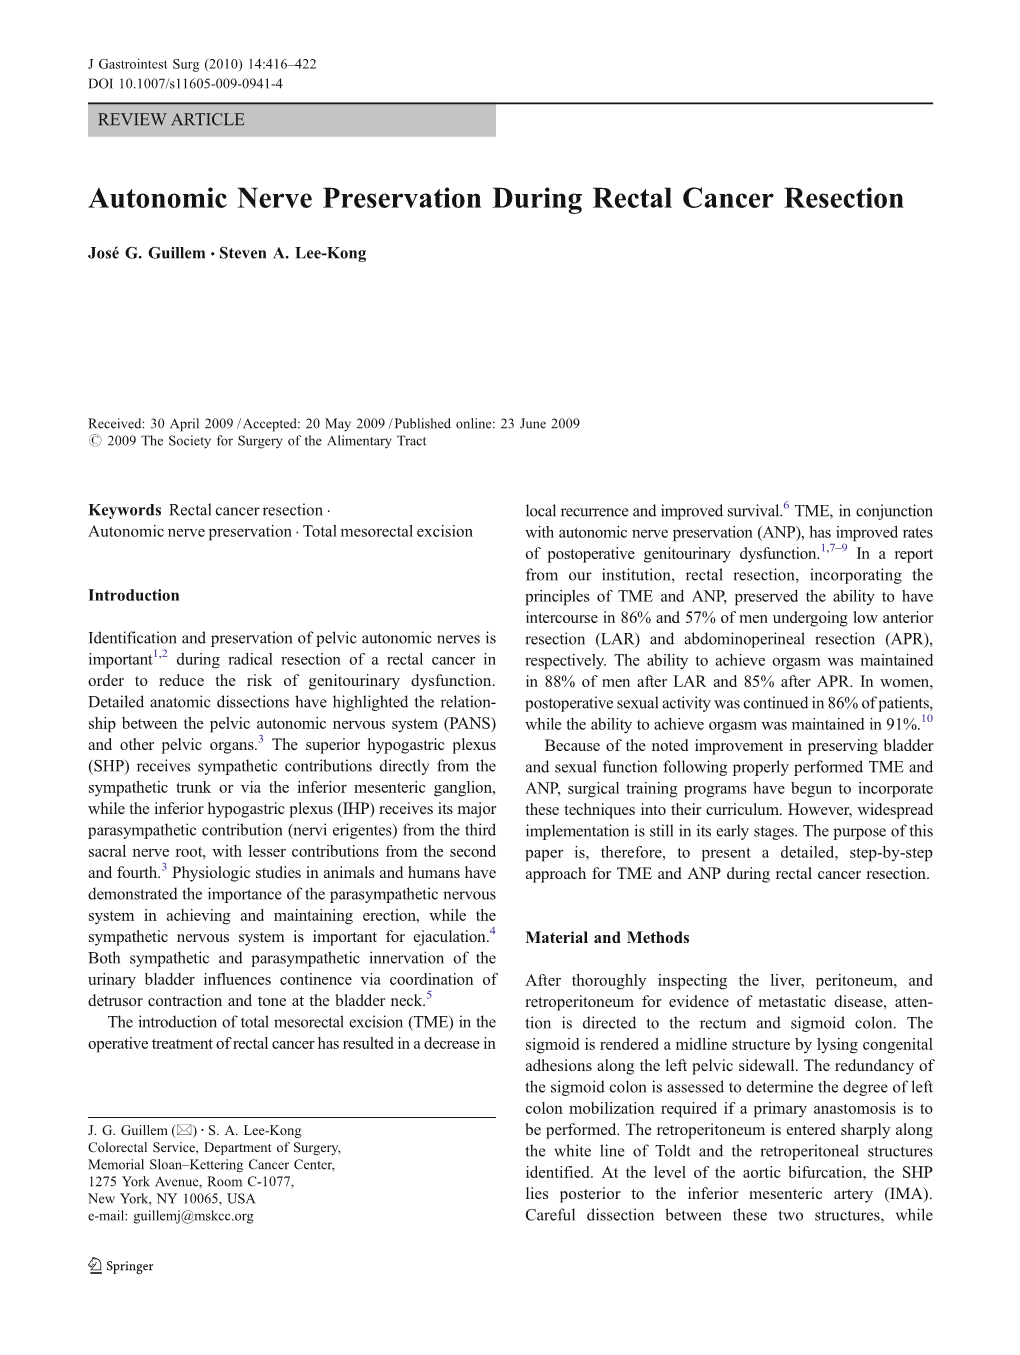 Autonomic Nerve Preservation During Rectal Cancer Resection